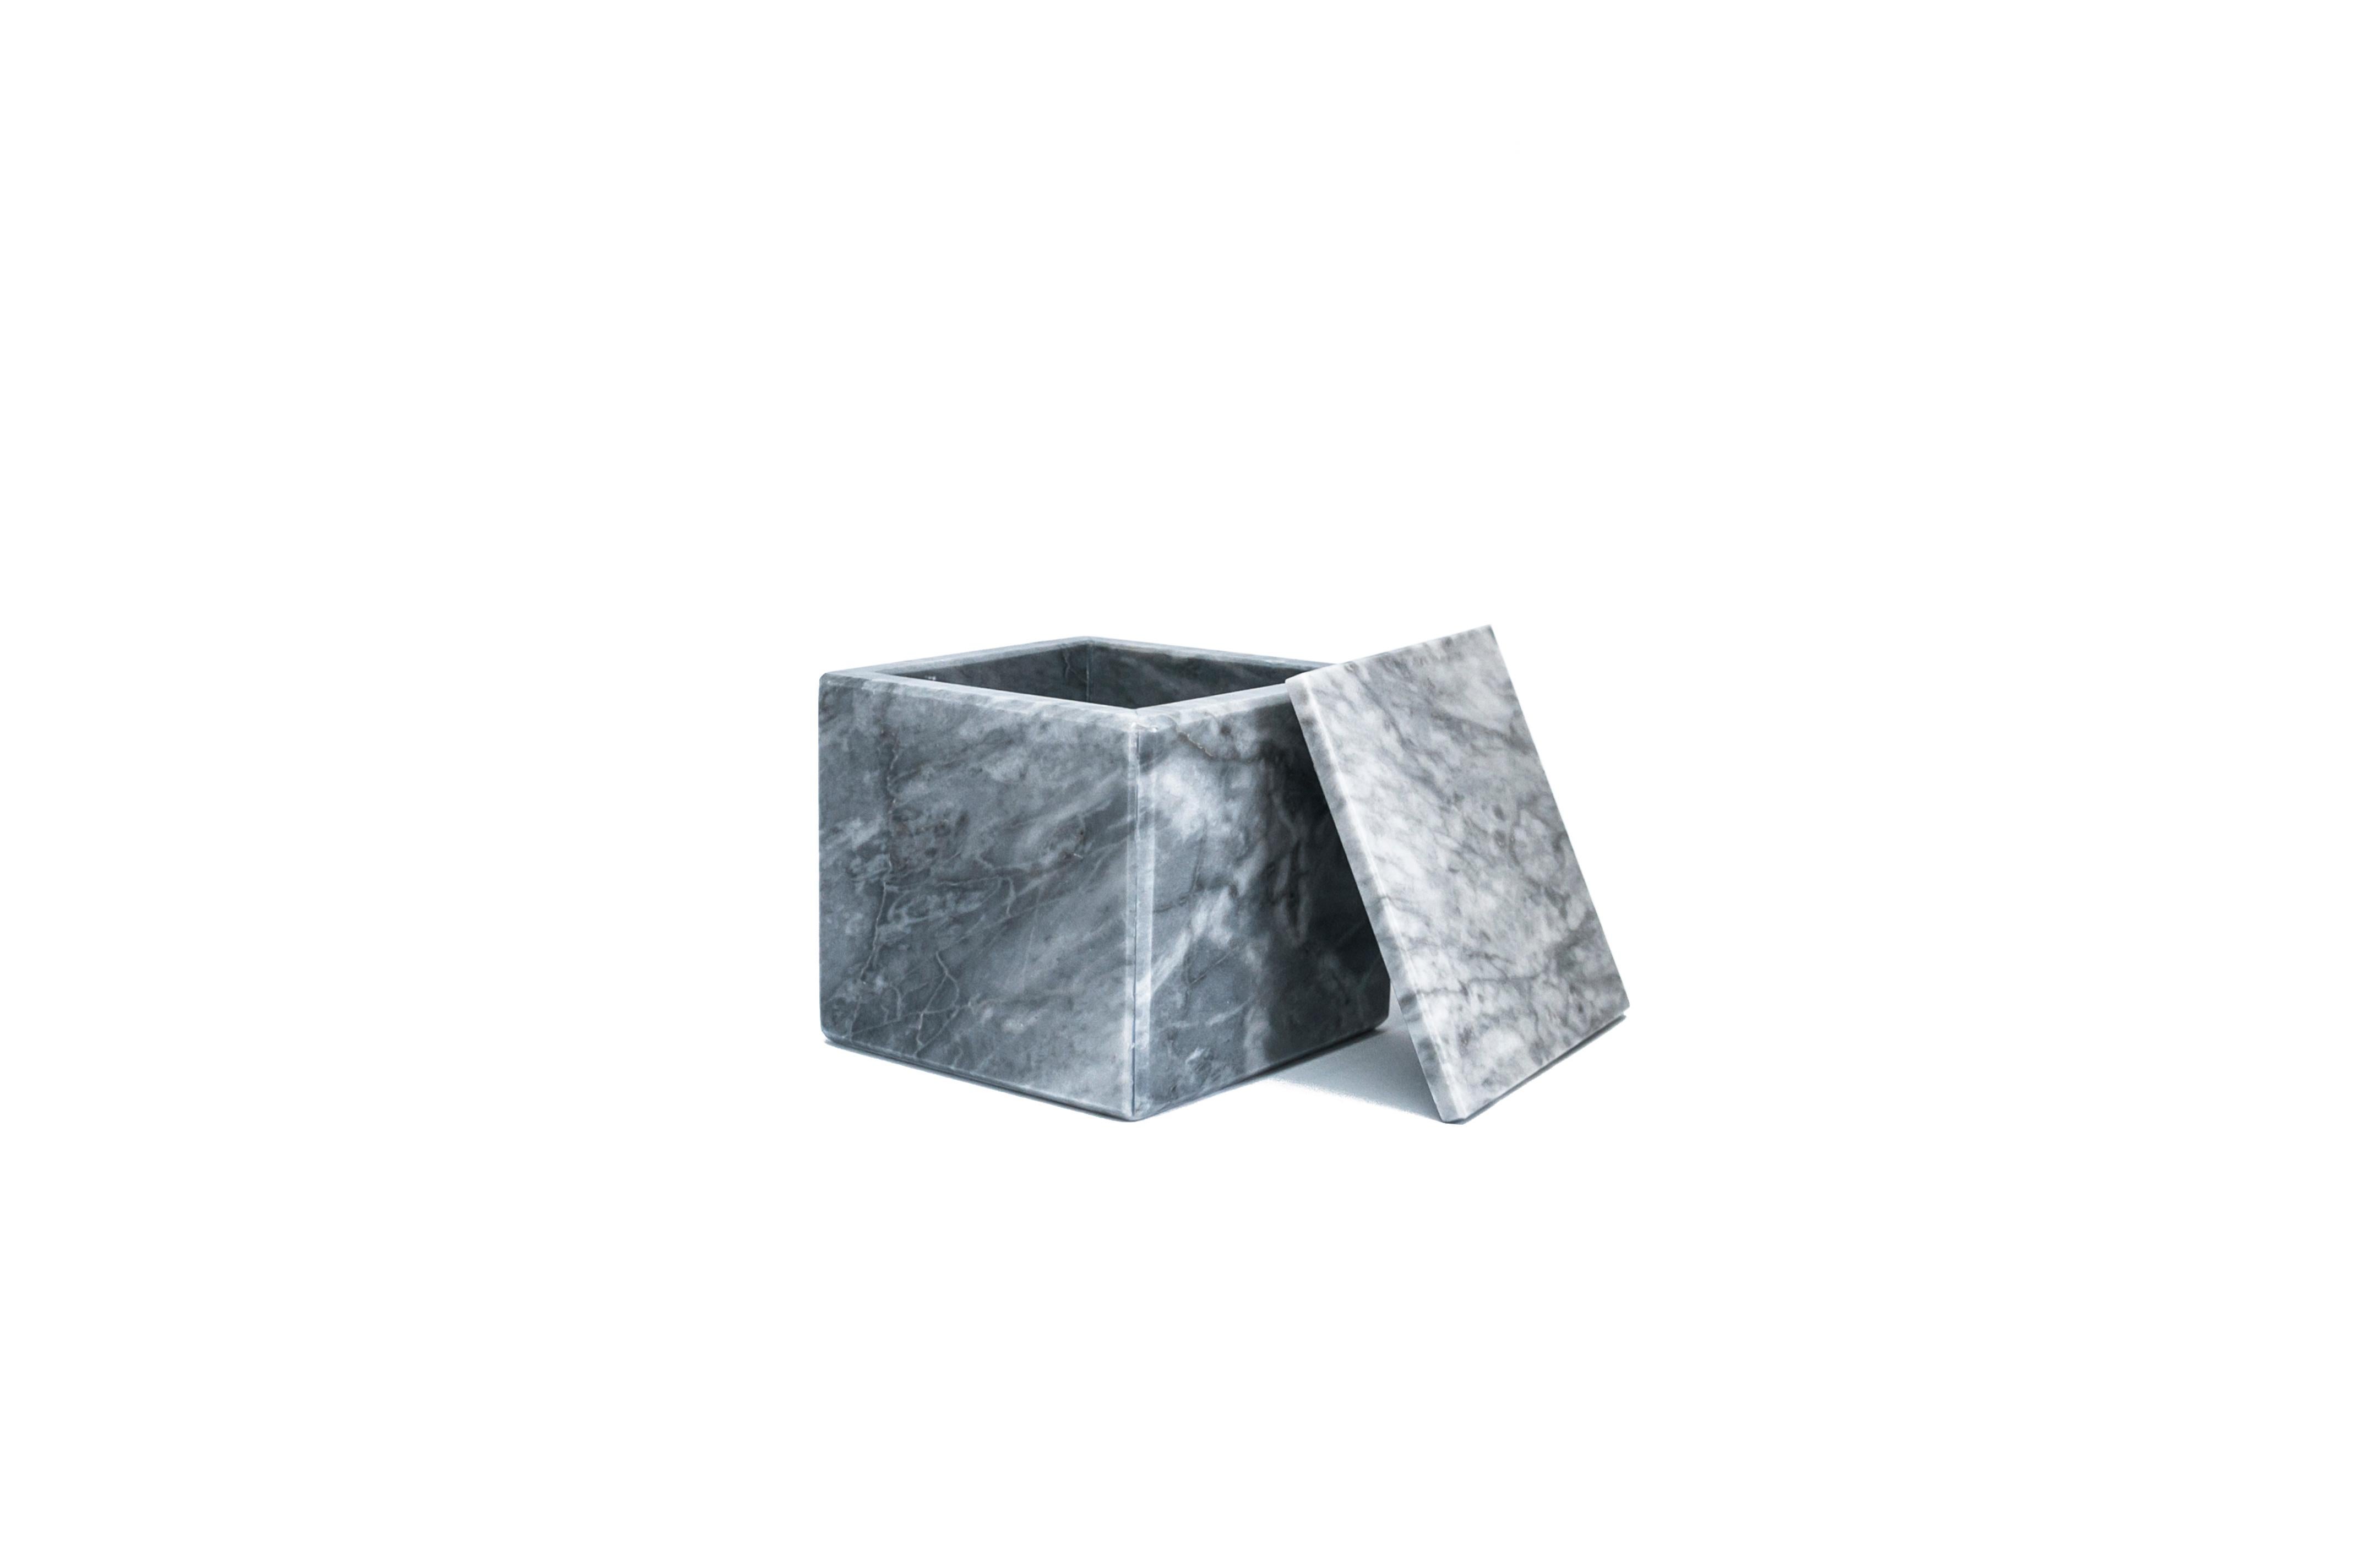 Squared grey Bardiglio marble box with lid.
Each piece is in a way unique (since each marble block is different in veins and shades) and handcrafted in Italy. Slight variations in shape, color and size are to be considered a guarantee of an